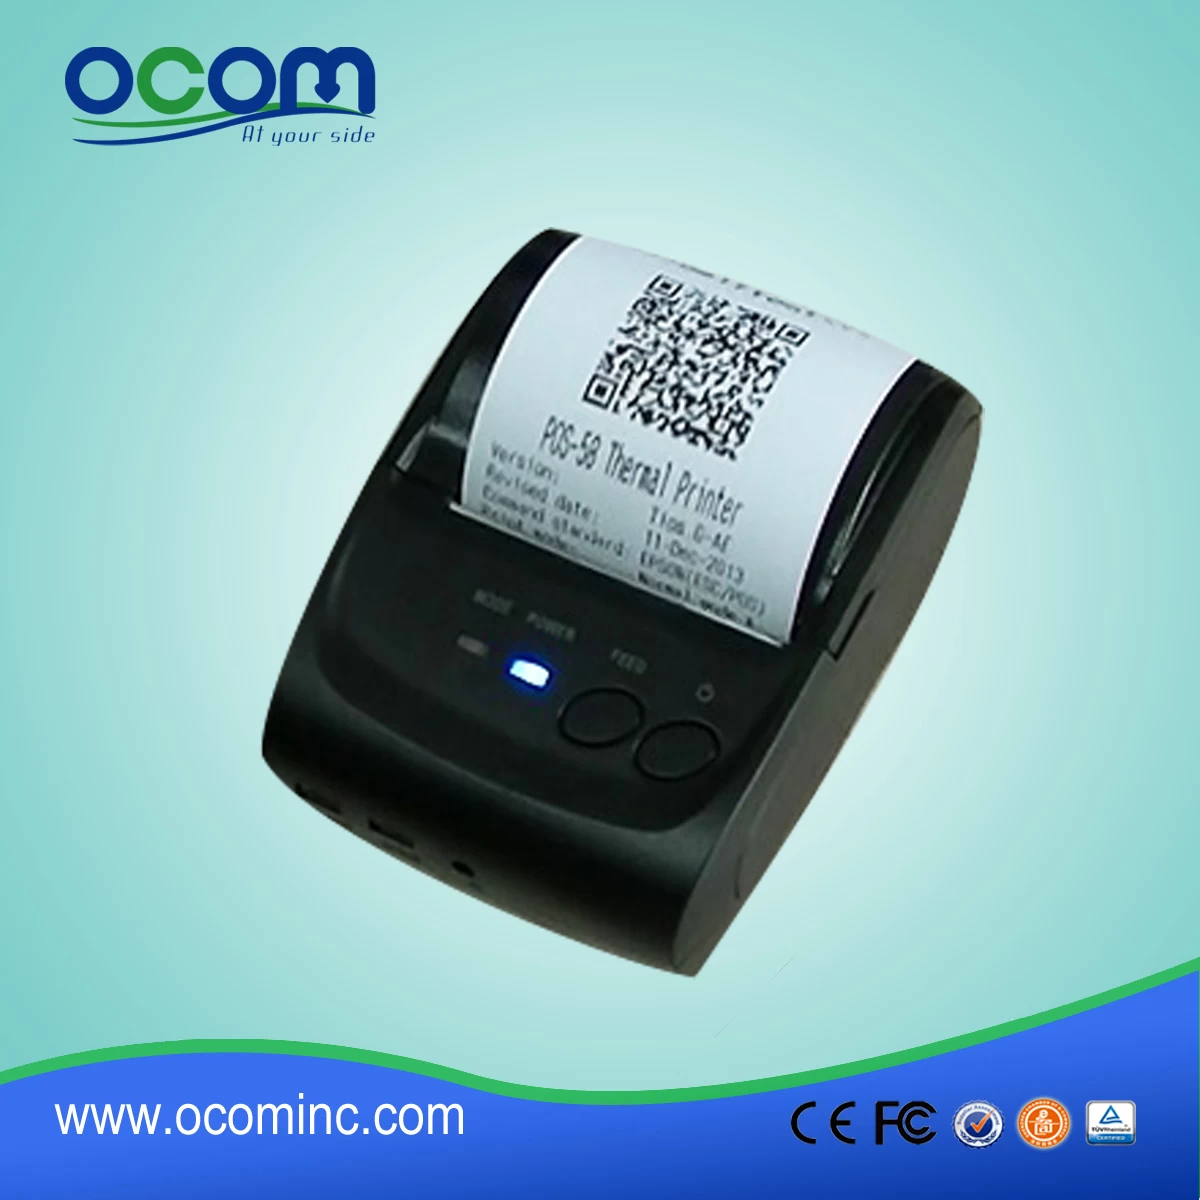 58mm printer ticket machine with reliable moudle (OCPP-M05)